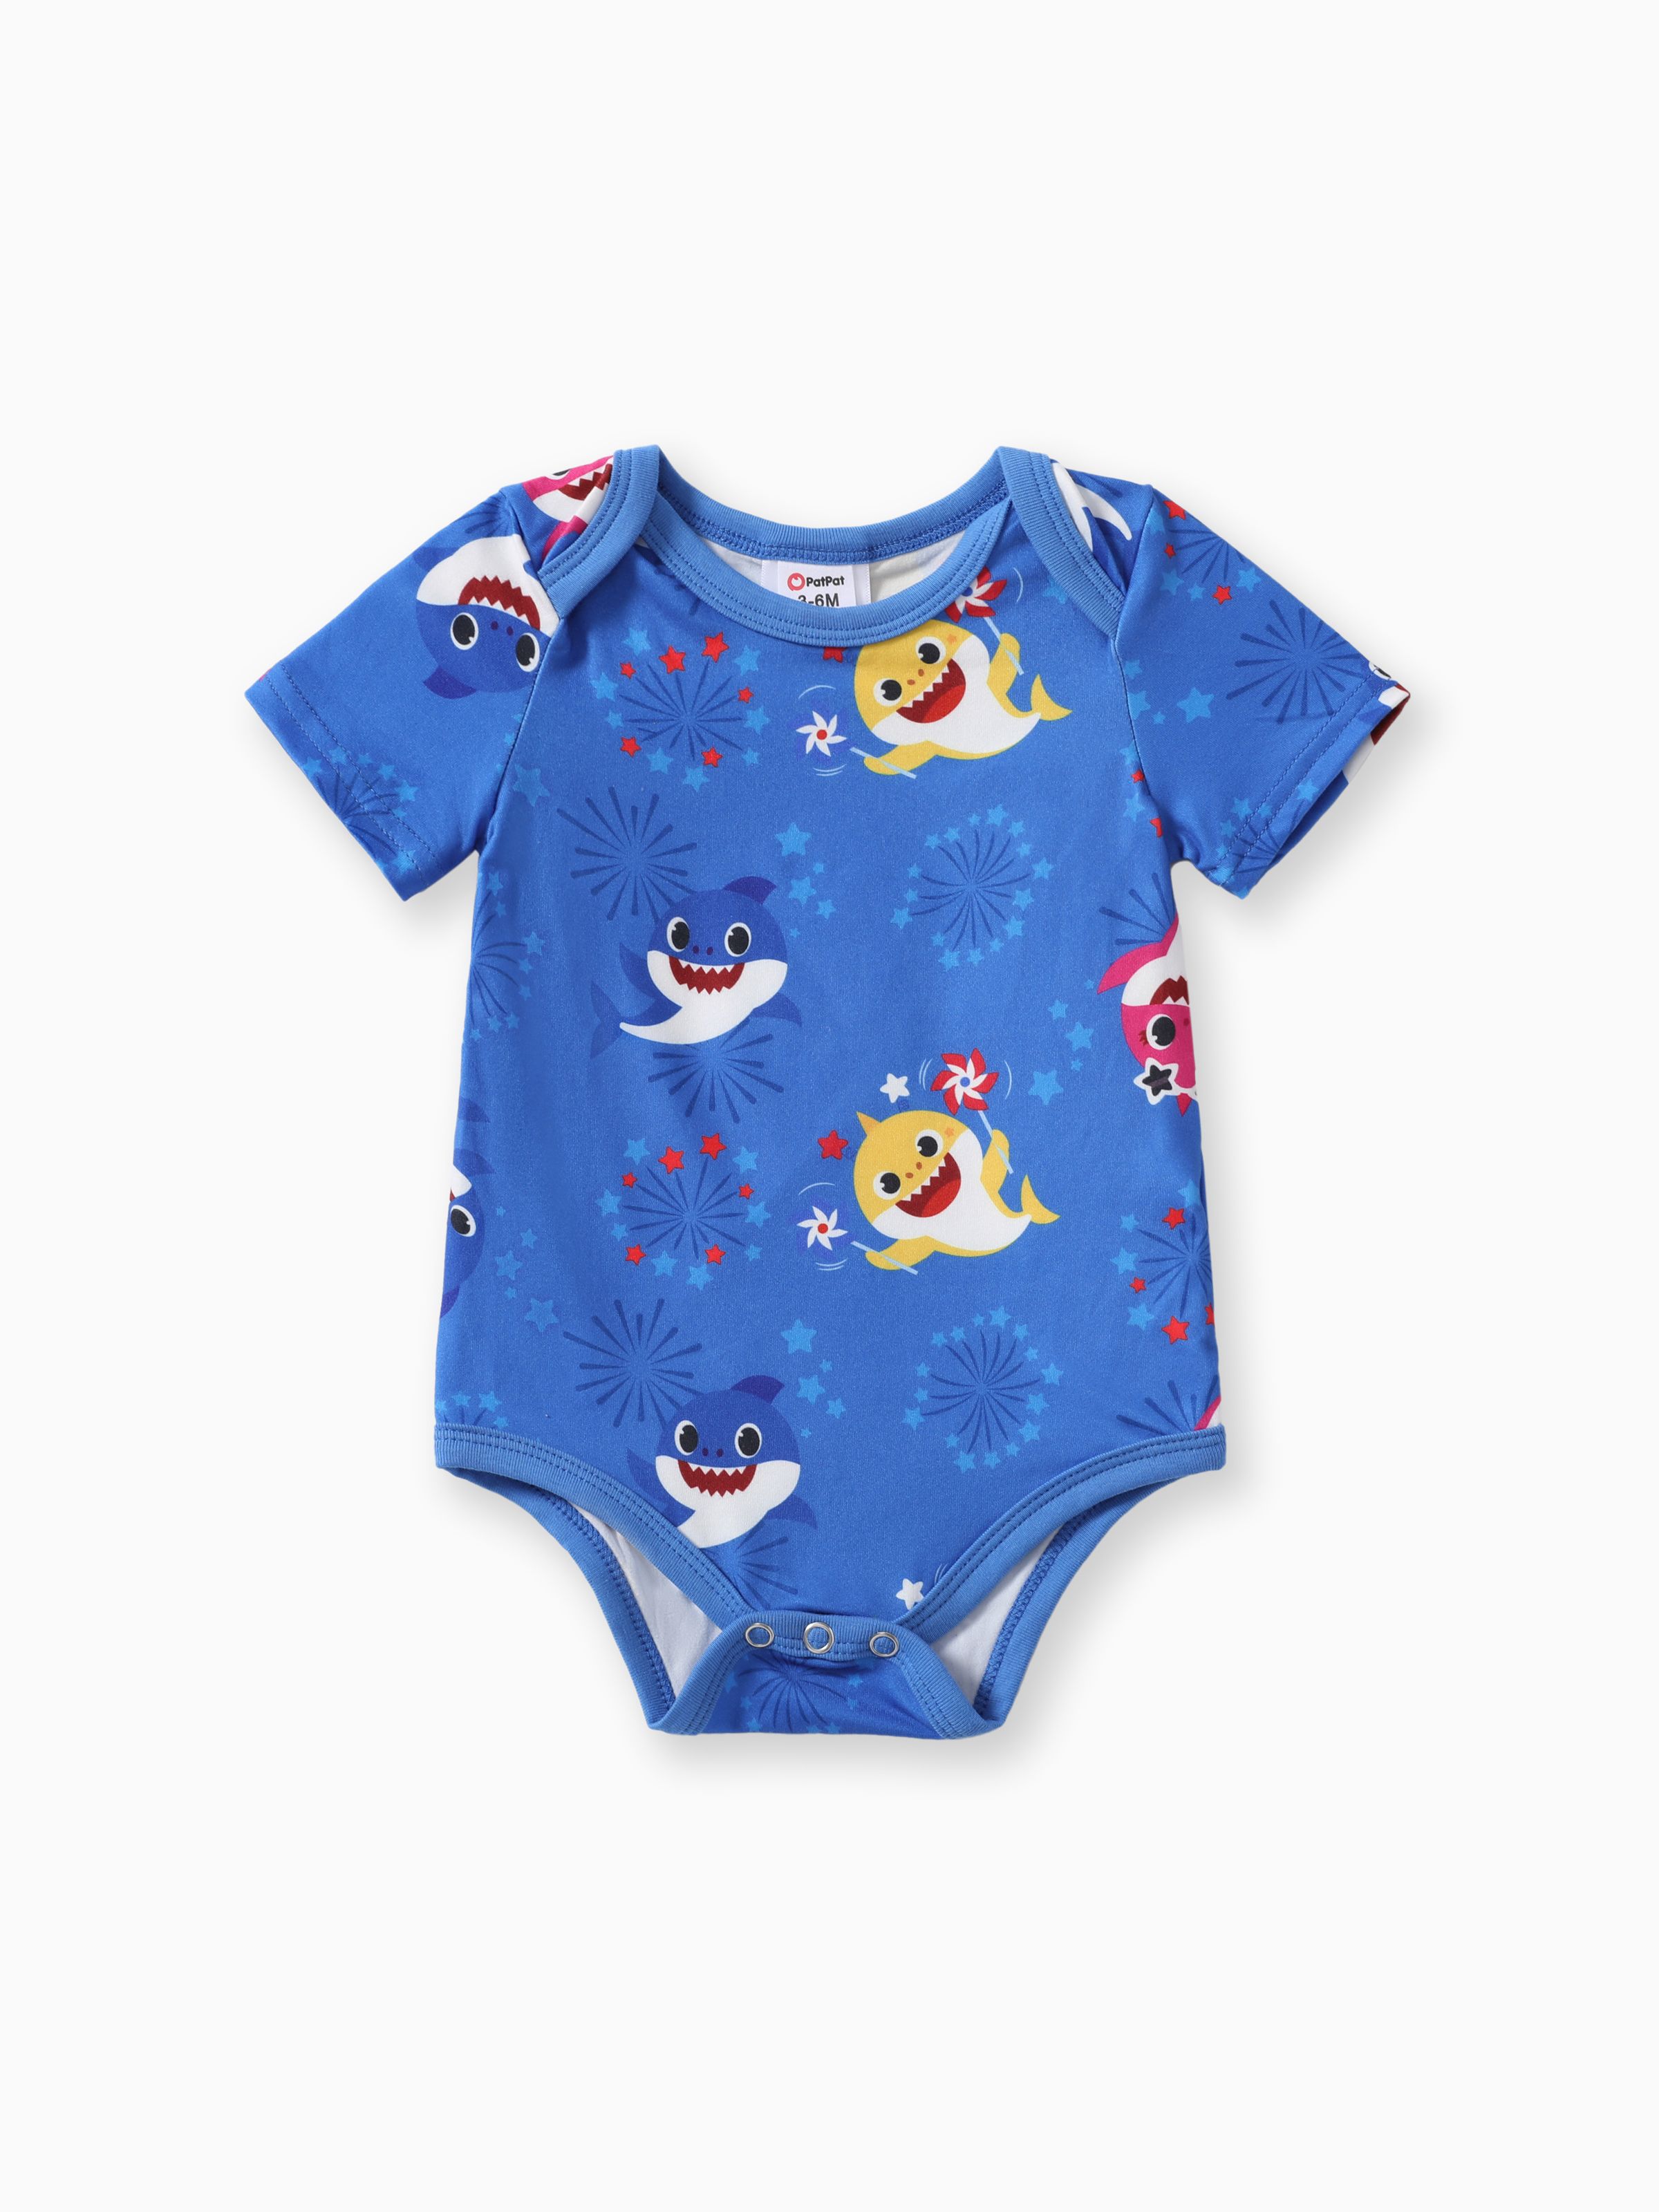 

Baby Shark Baby Boys/Girls 1pc Independence Day Firework Print Romper